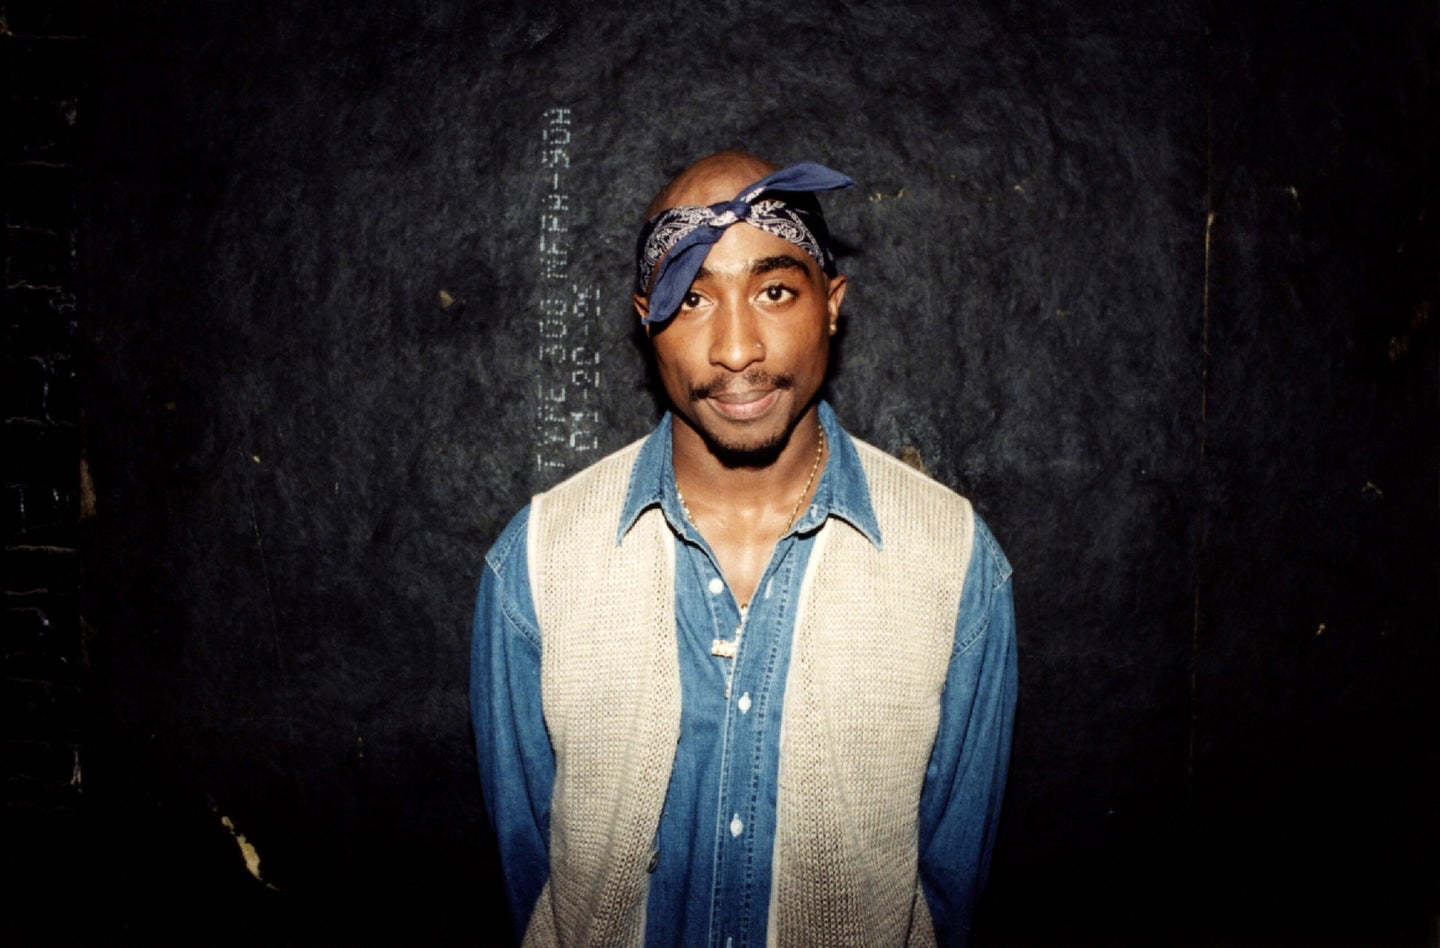 Rapper Tupac Shakur poses for photos backstage after his performance at the Regal Theater in Chicago, Illinois in March 1994.